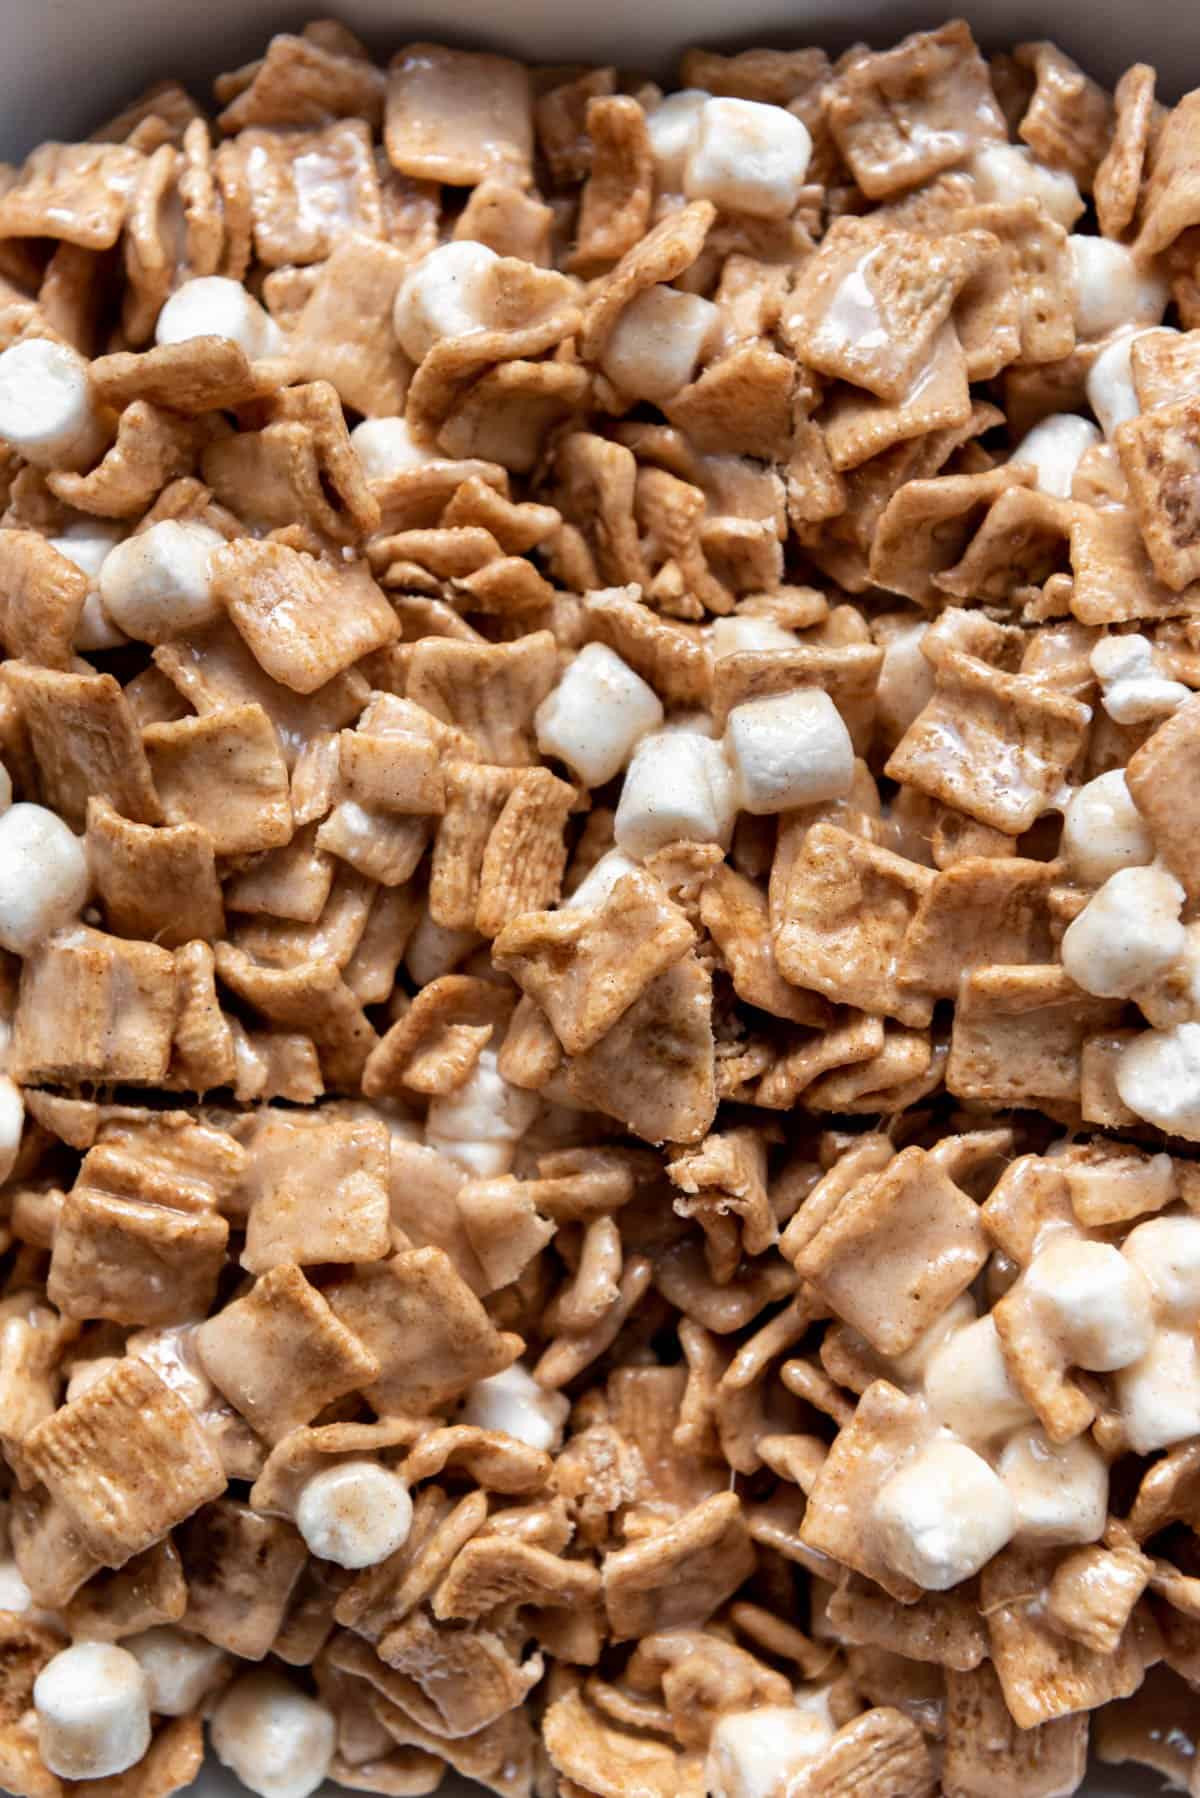 A close-up image of marshmallows and Cinnamon Toast Crunch Cereal bars.